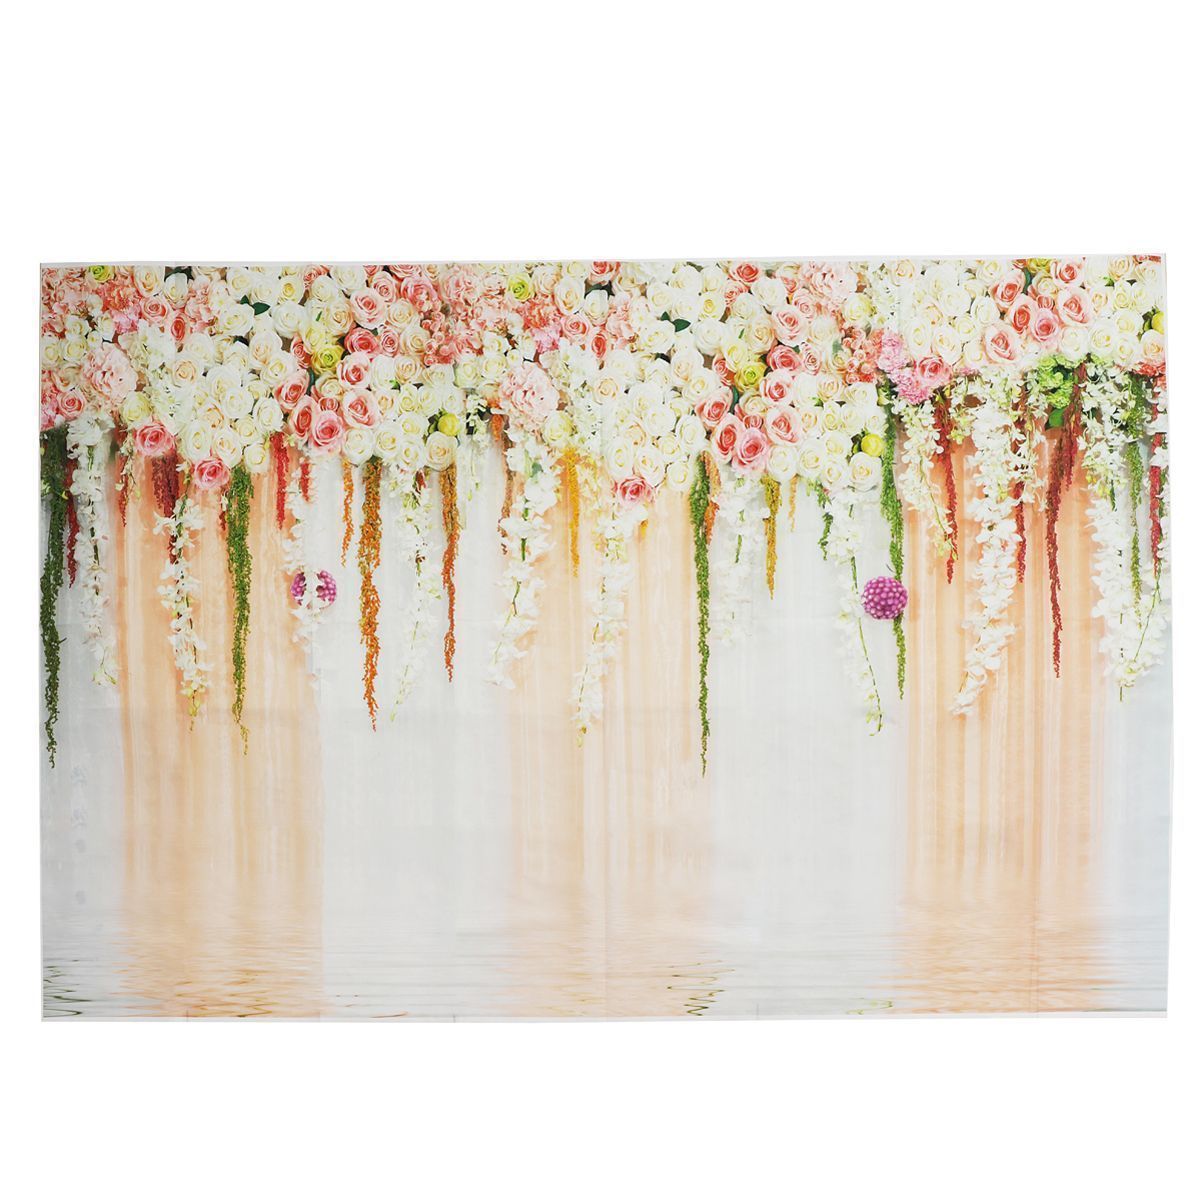 7x5FT-Wedding-Romantic-Flower-Wall-Backdrop-Photography-Prop-Photo-Background-1697003